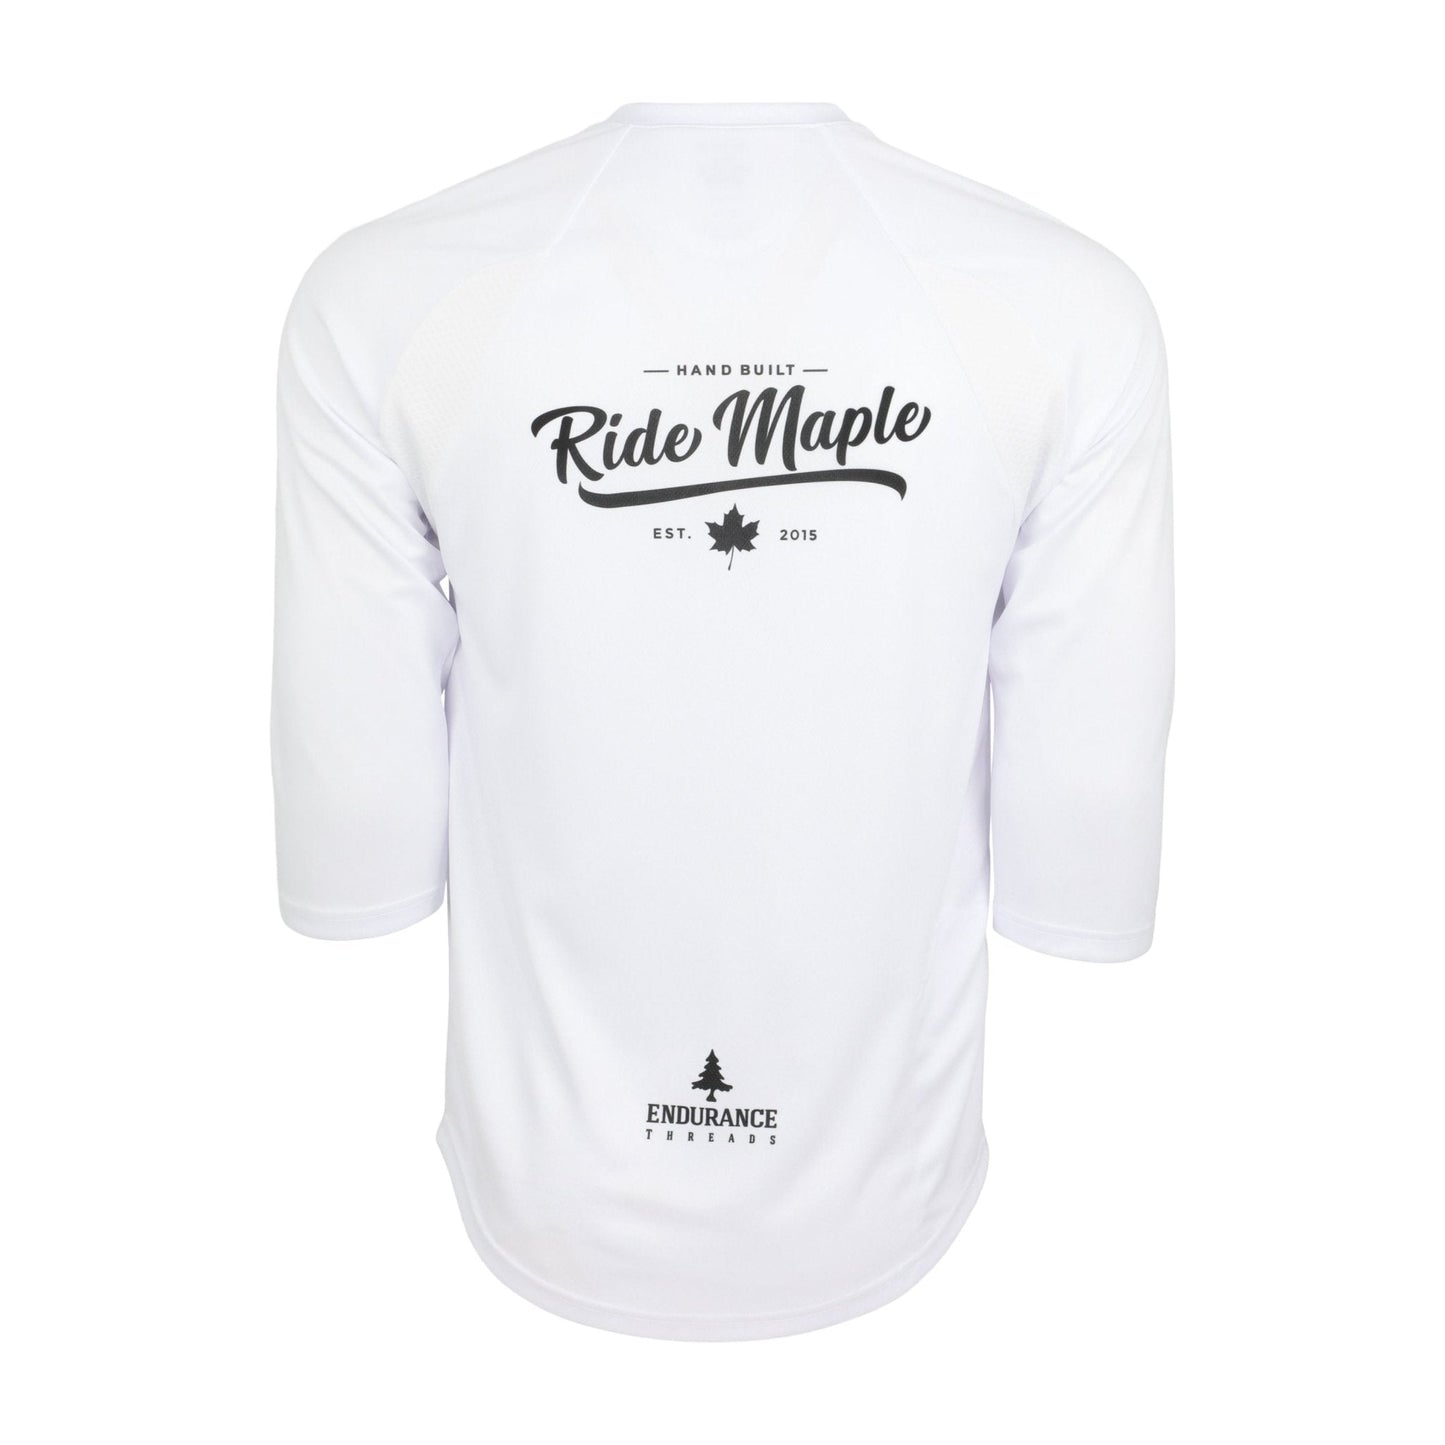 Classy Ride Maple SendIt MTB 3/4 Jersey - Relaxed Fit (Final Sale) - Ride Maple